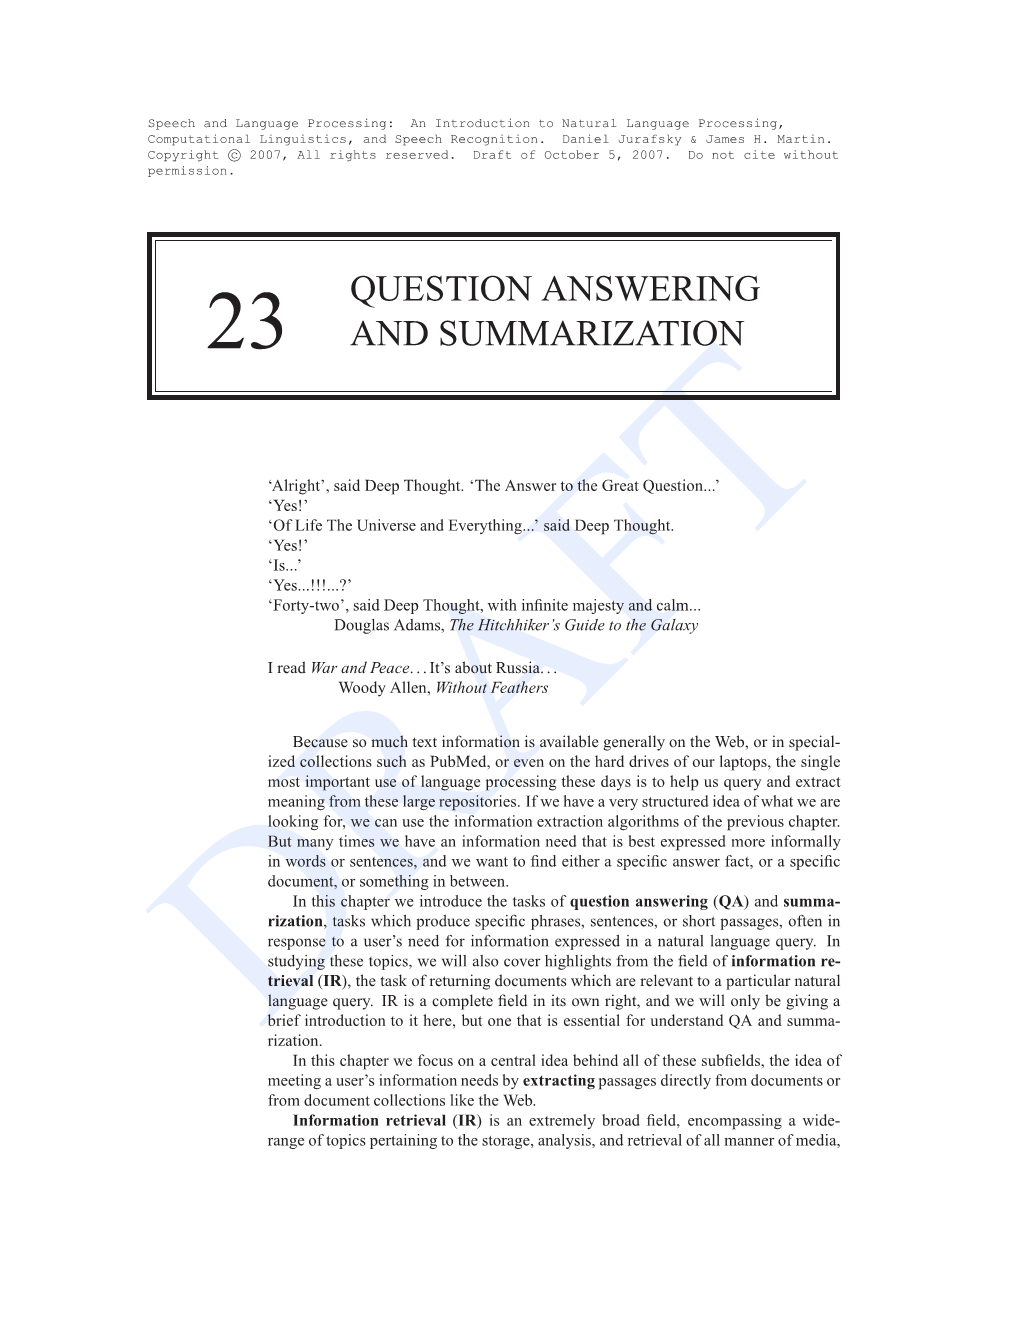 Question Answering and Summarization